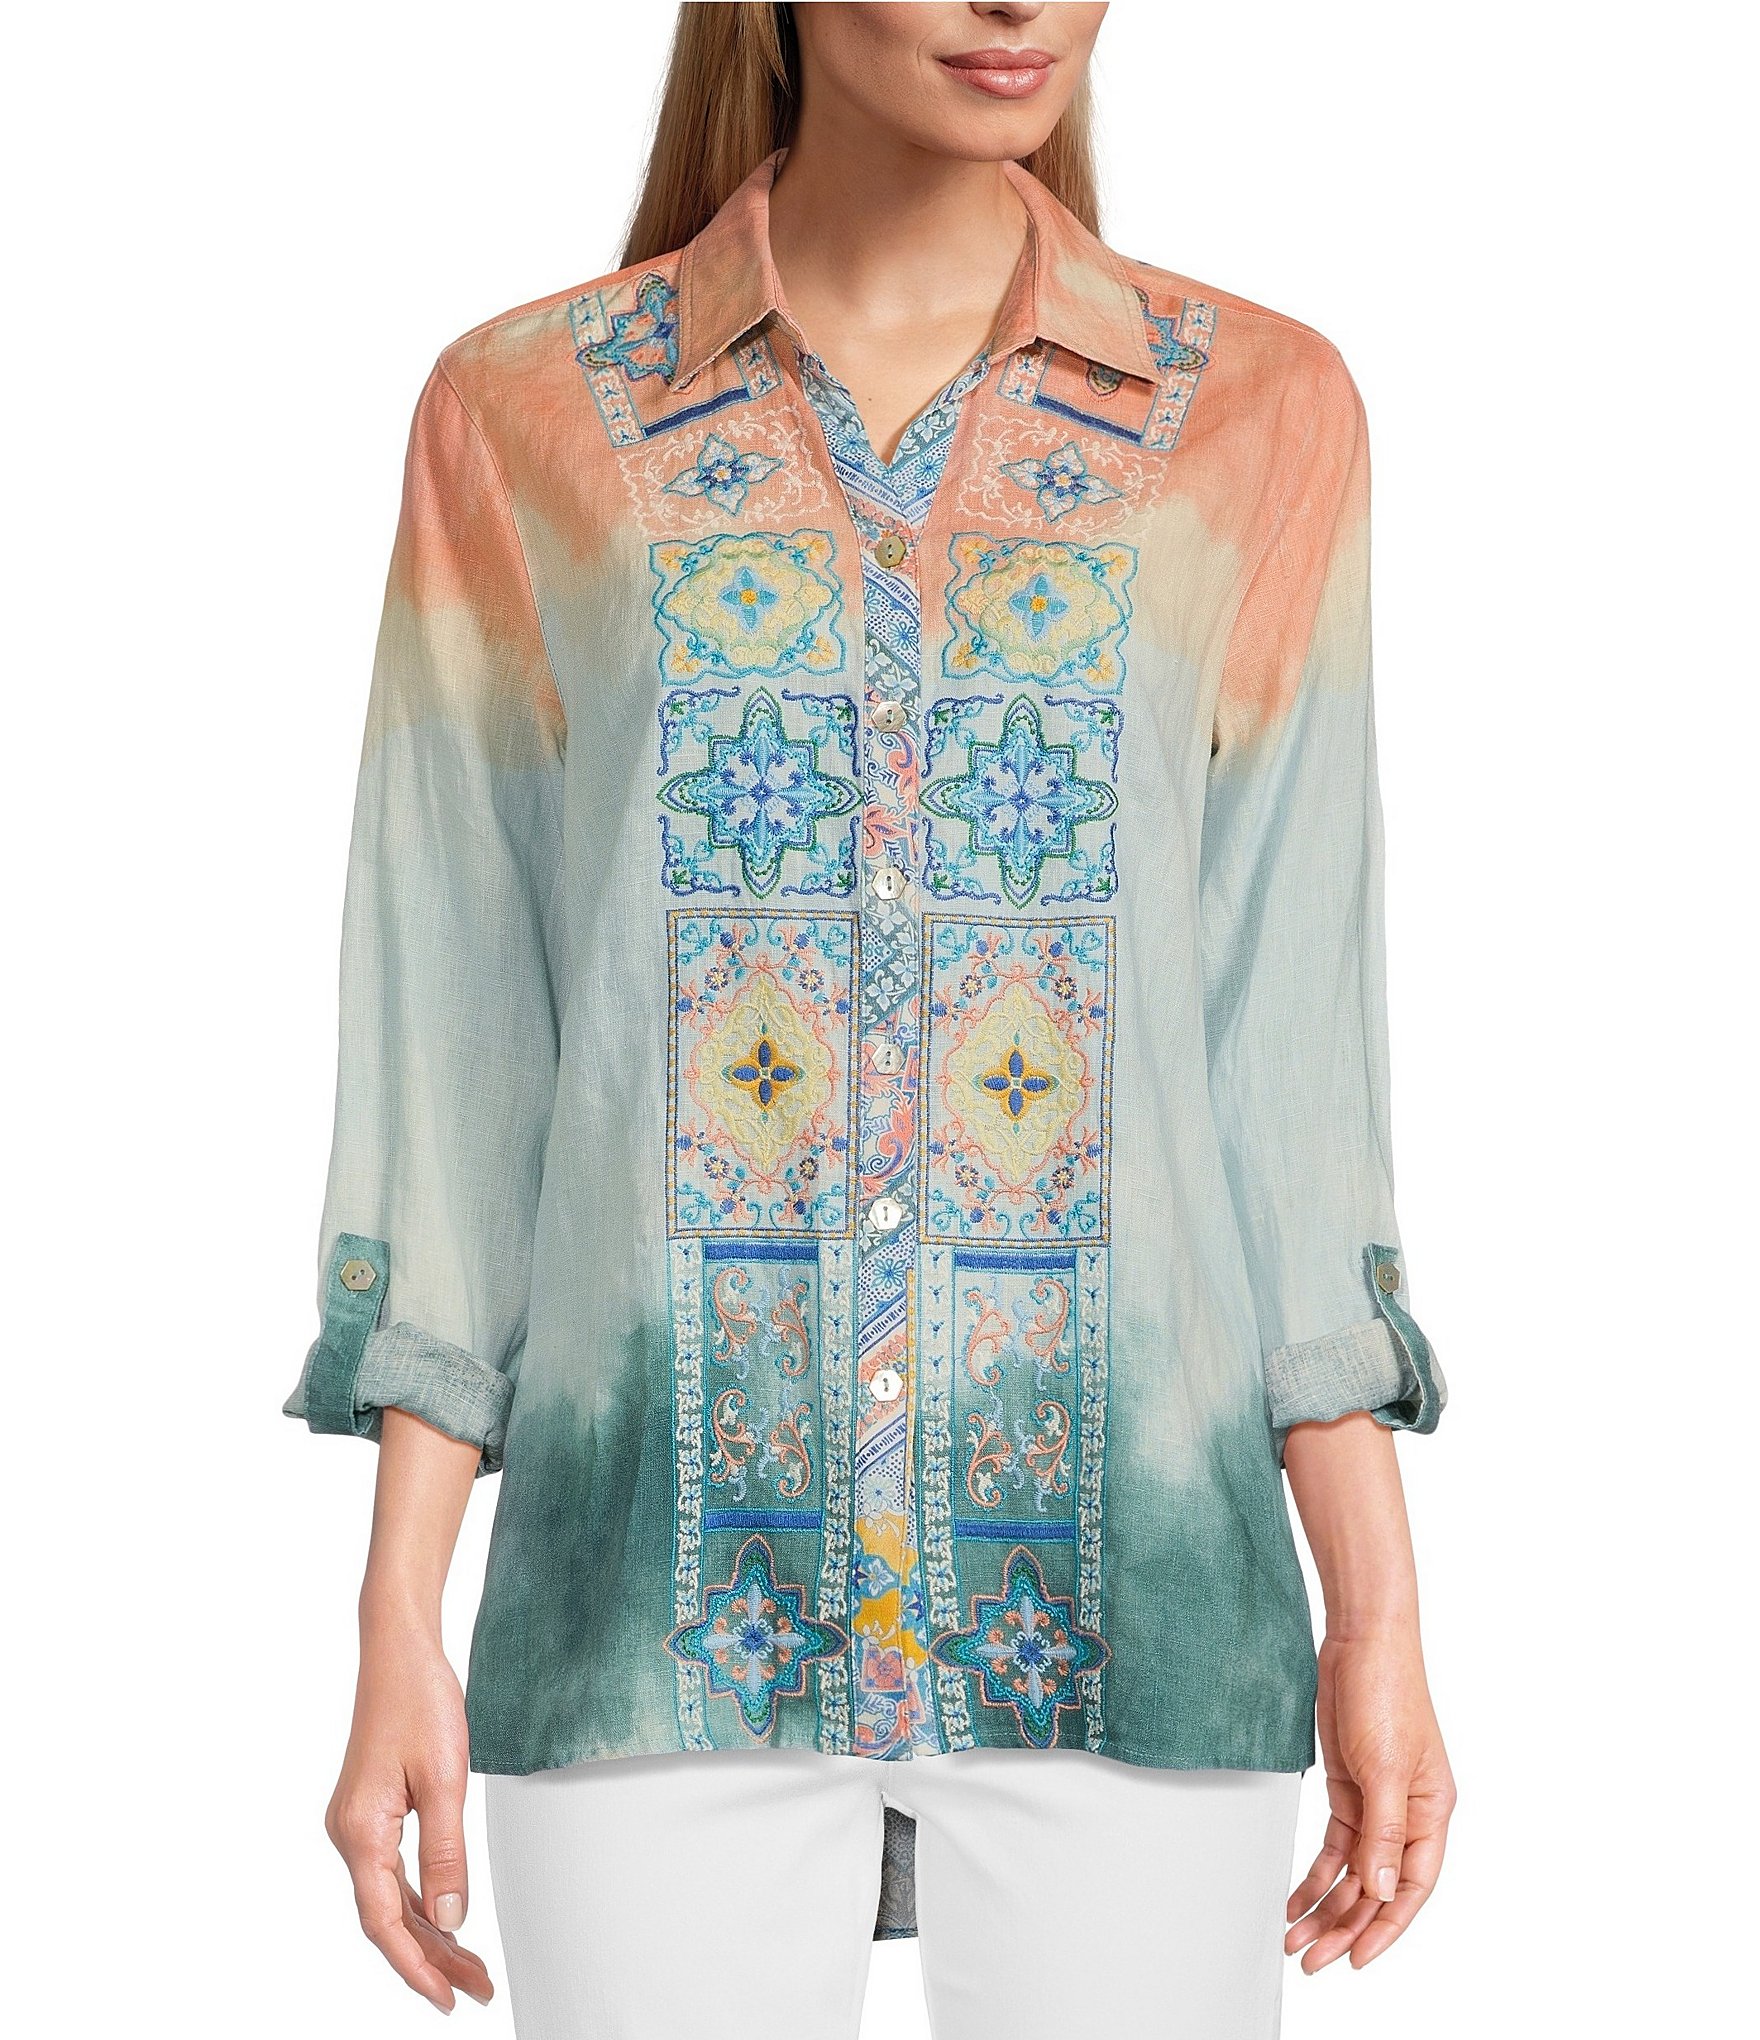 Embroidered Tops for Women Summer Boho Choth Mexican Bohemian Peasant Tops  Loose 3/4 Sleeves Shirts Blouse Top